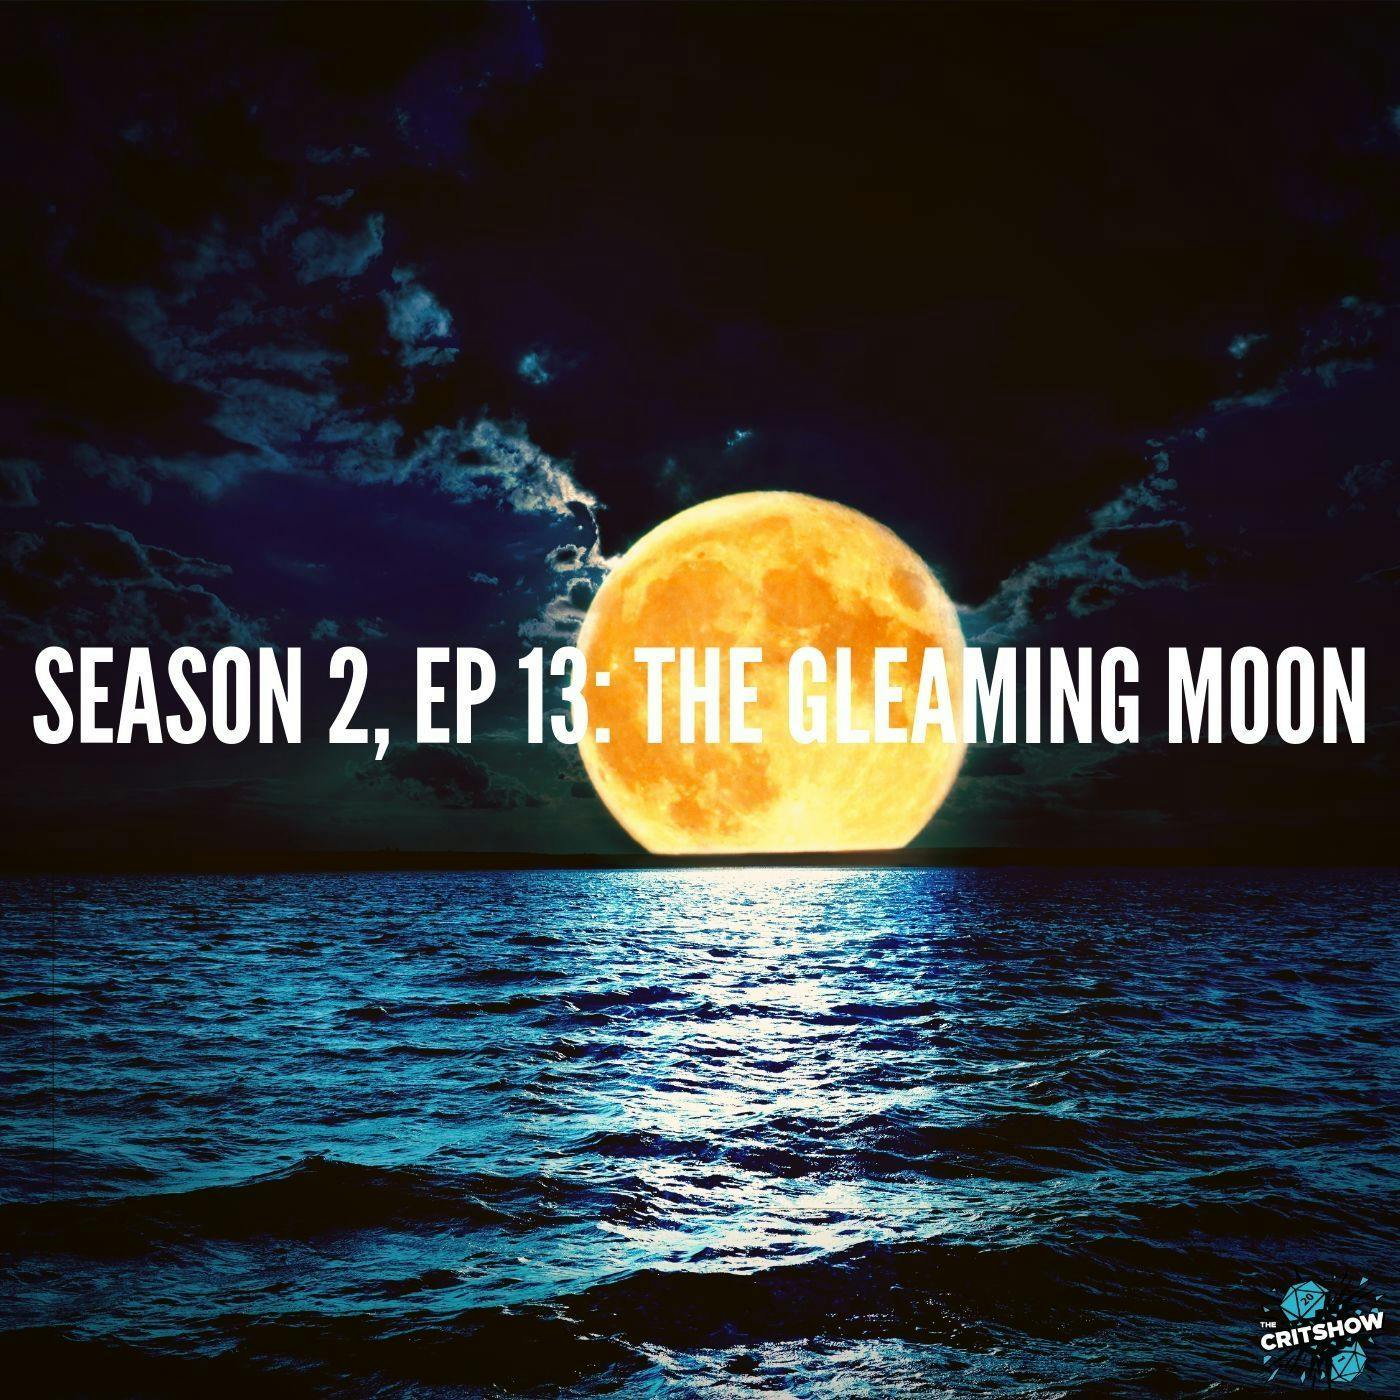 The Gleaming Moon (S2, E13)